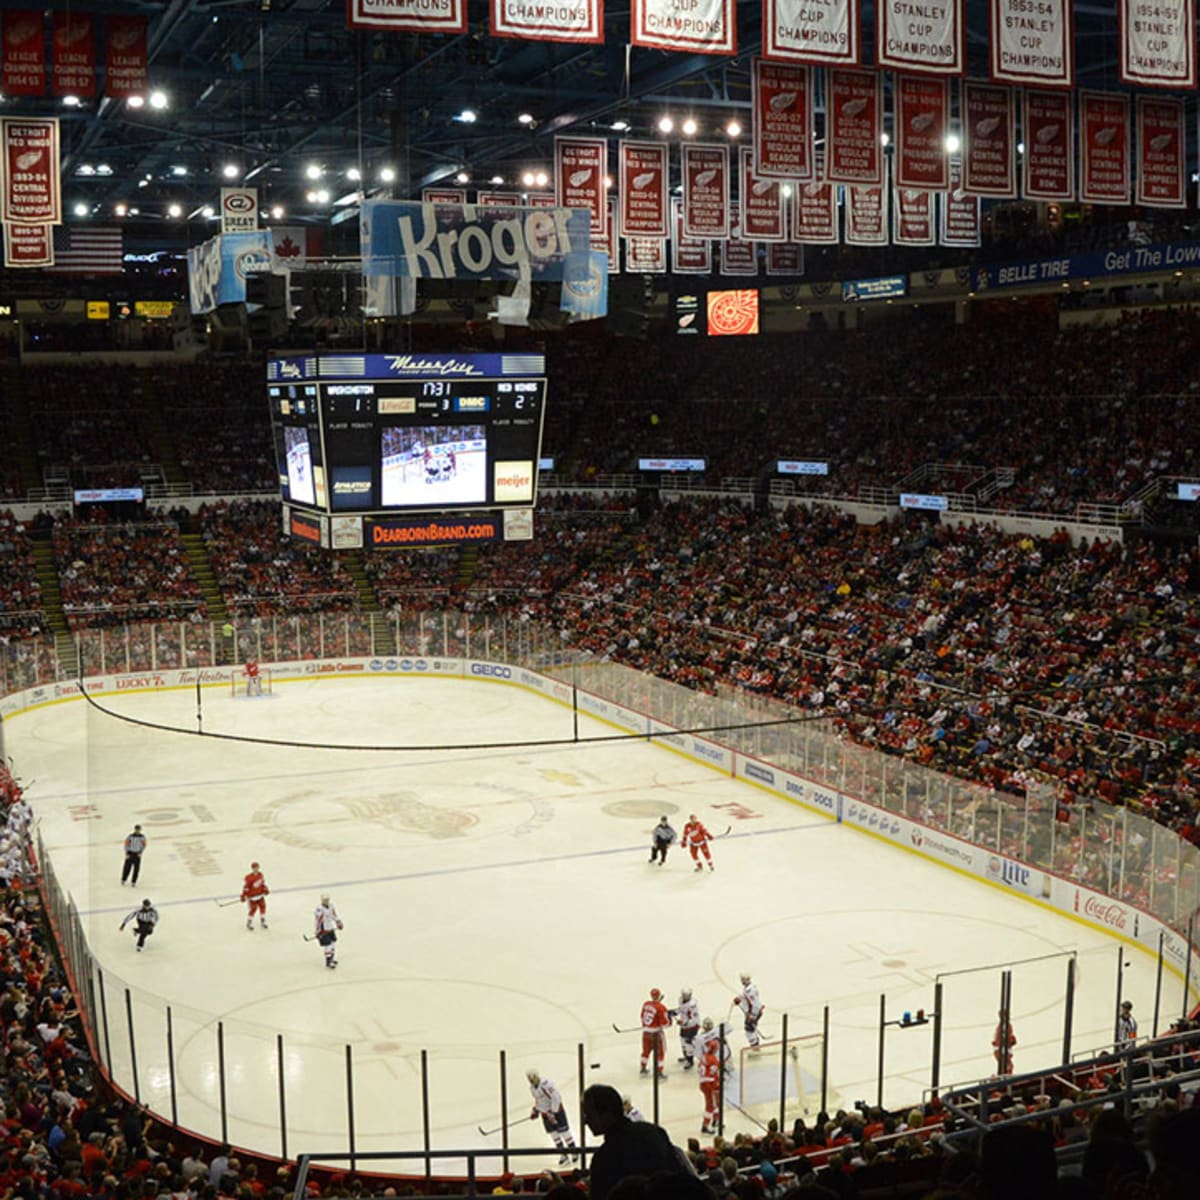 The life and times of Joe Louis Arena